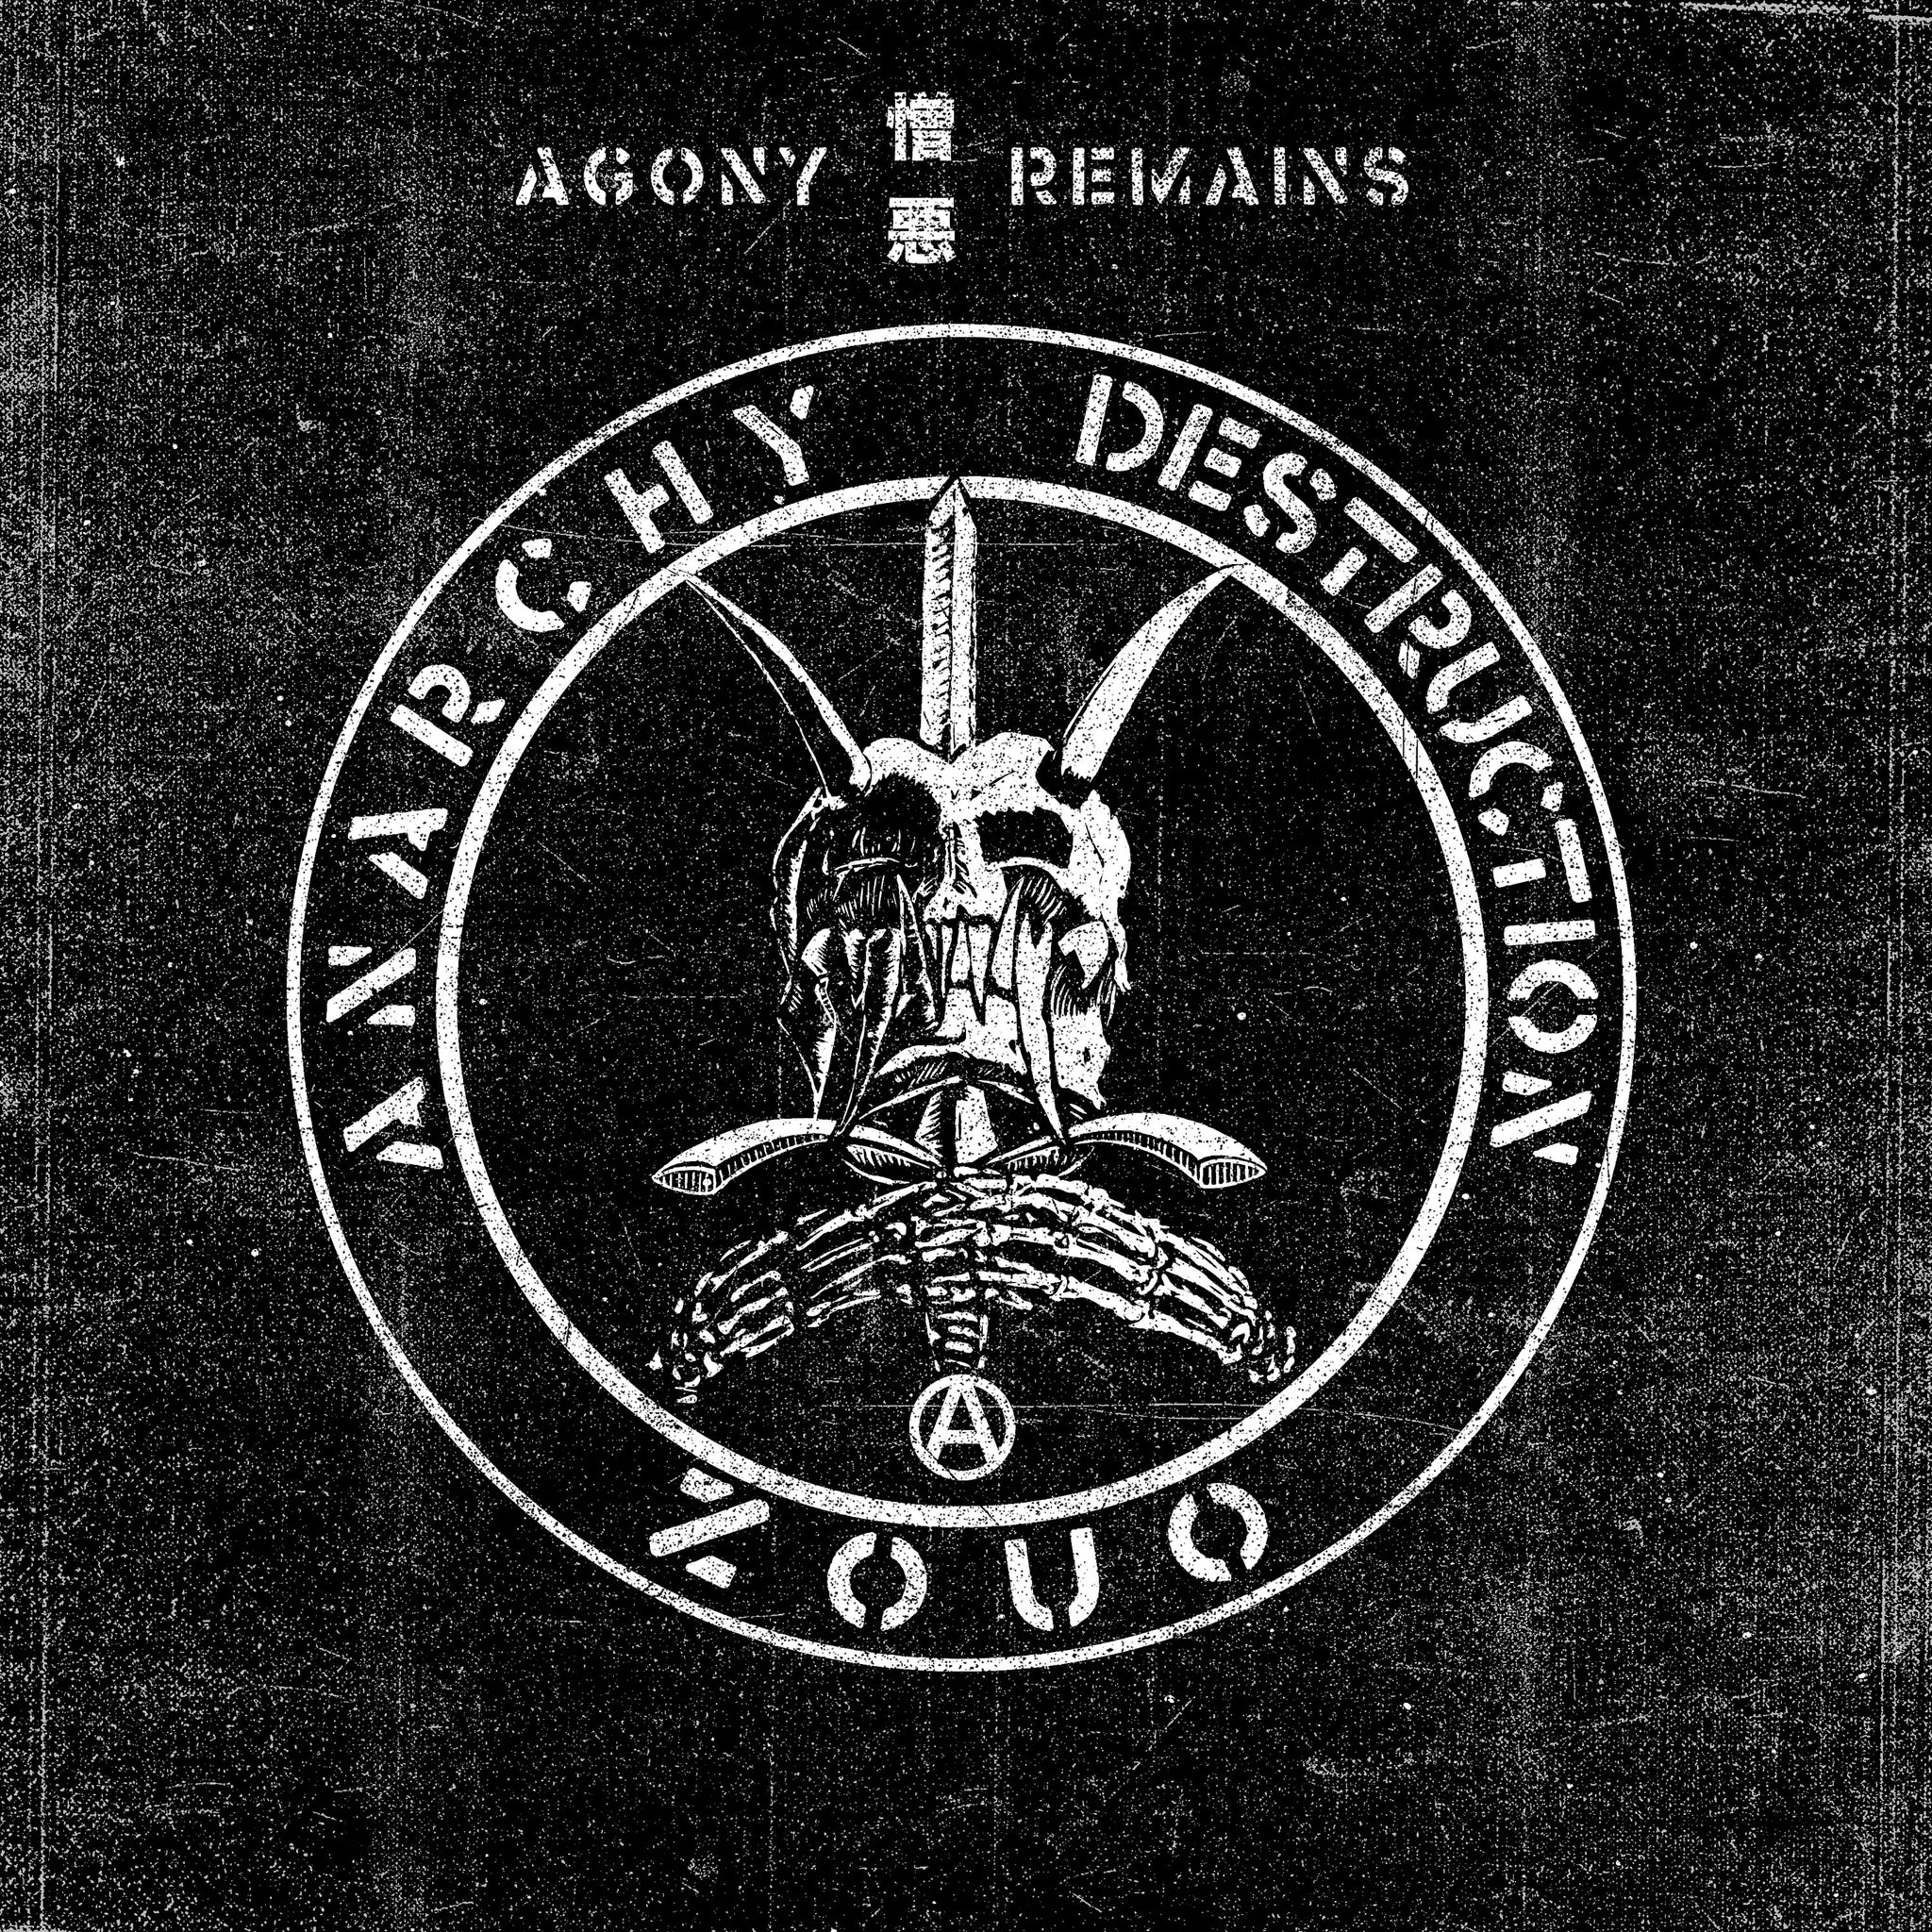 Zouo "Agony Remains" LP